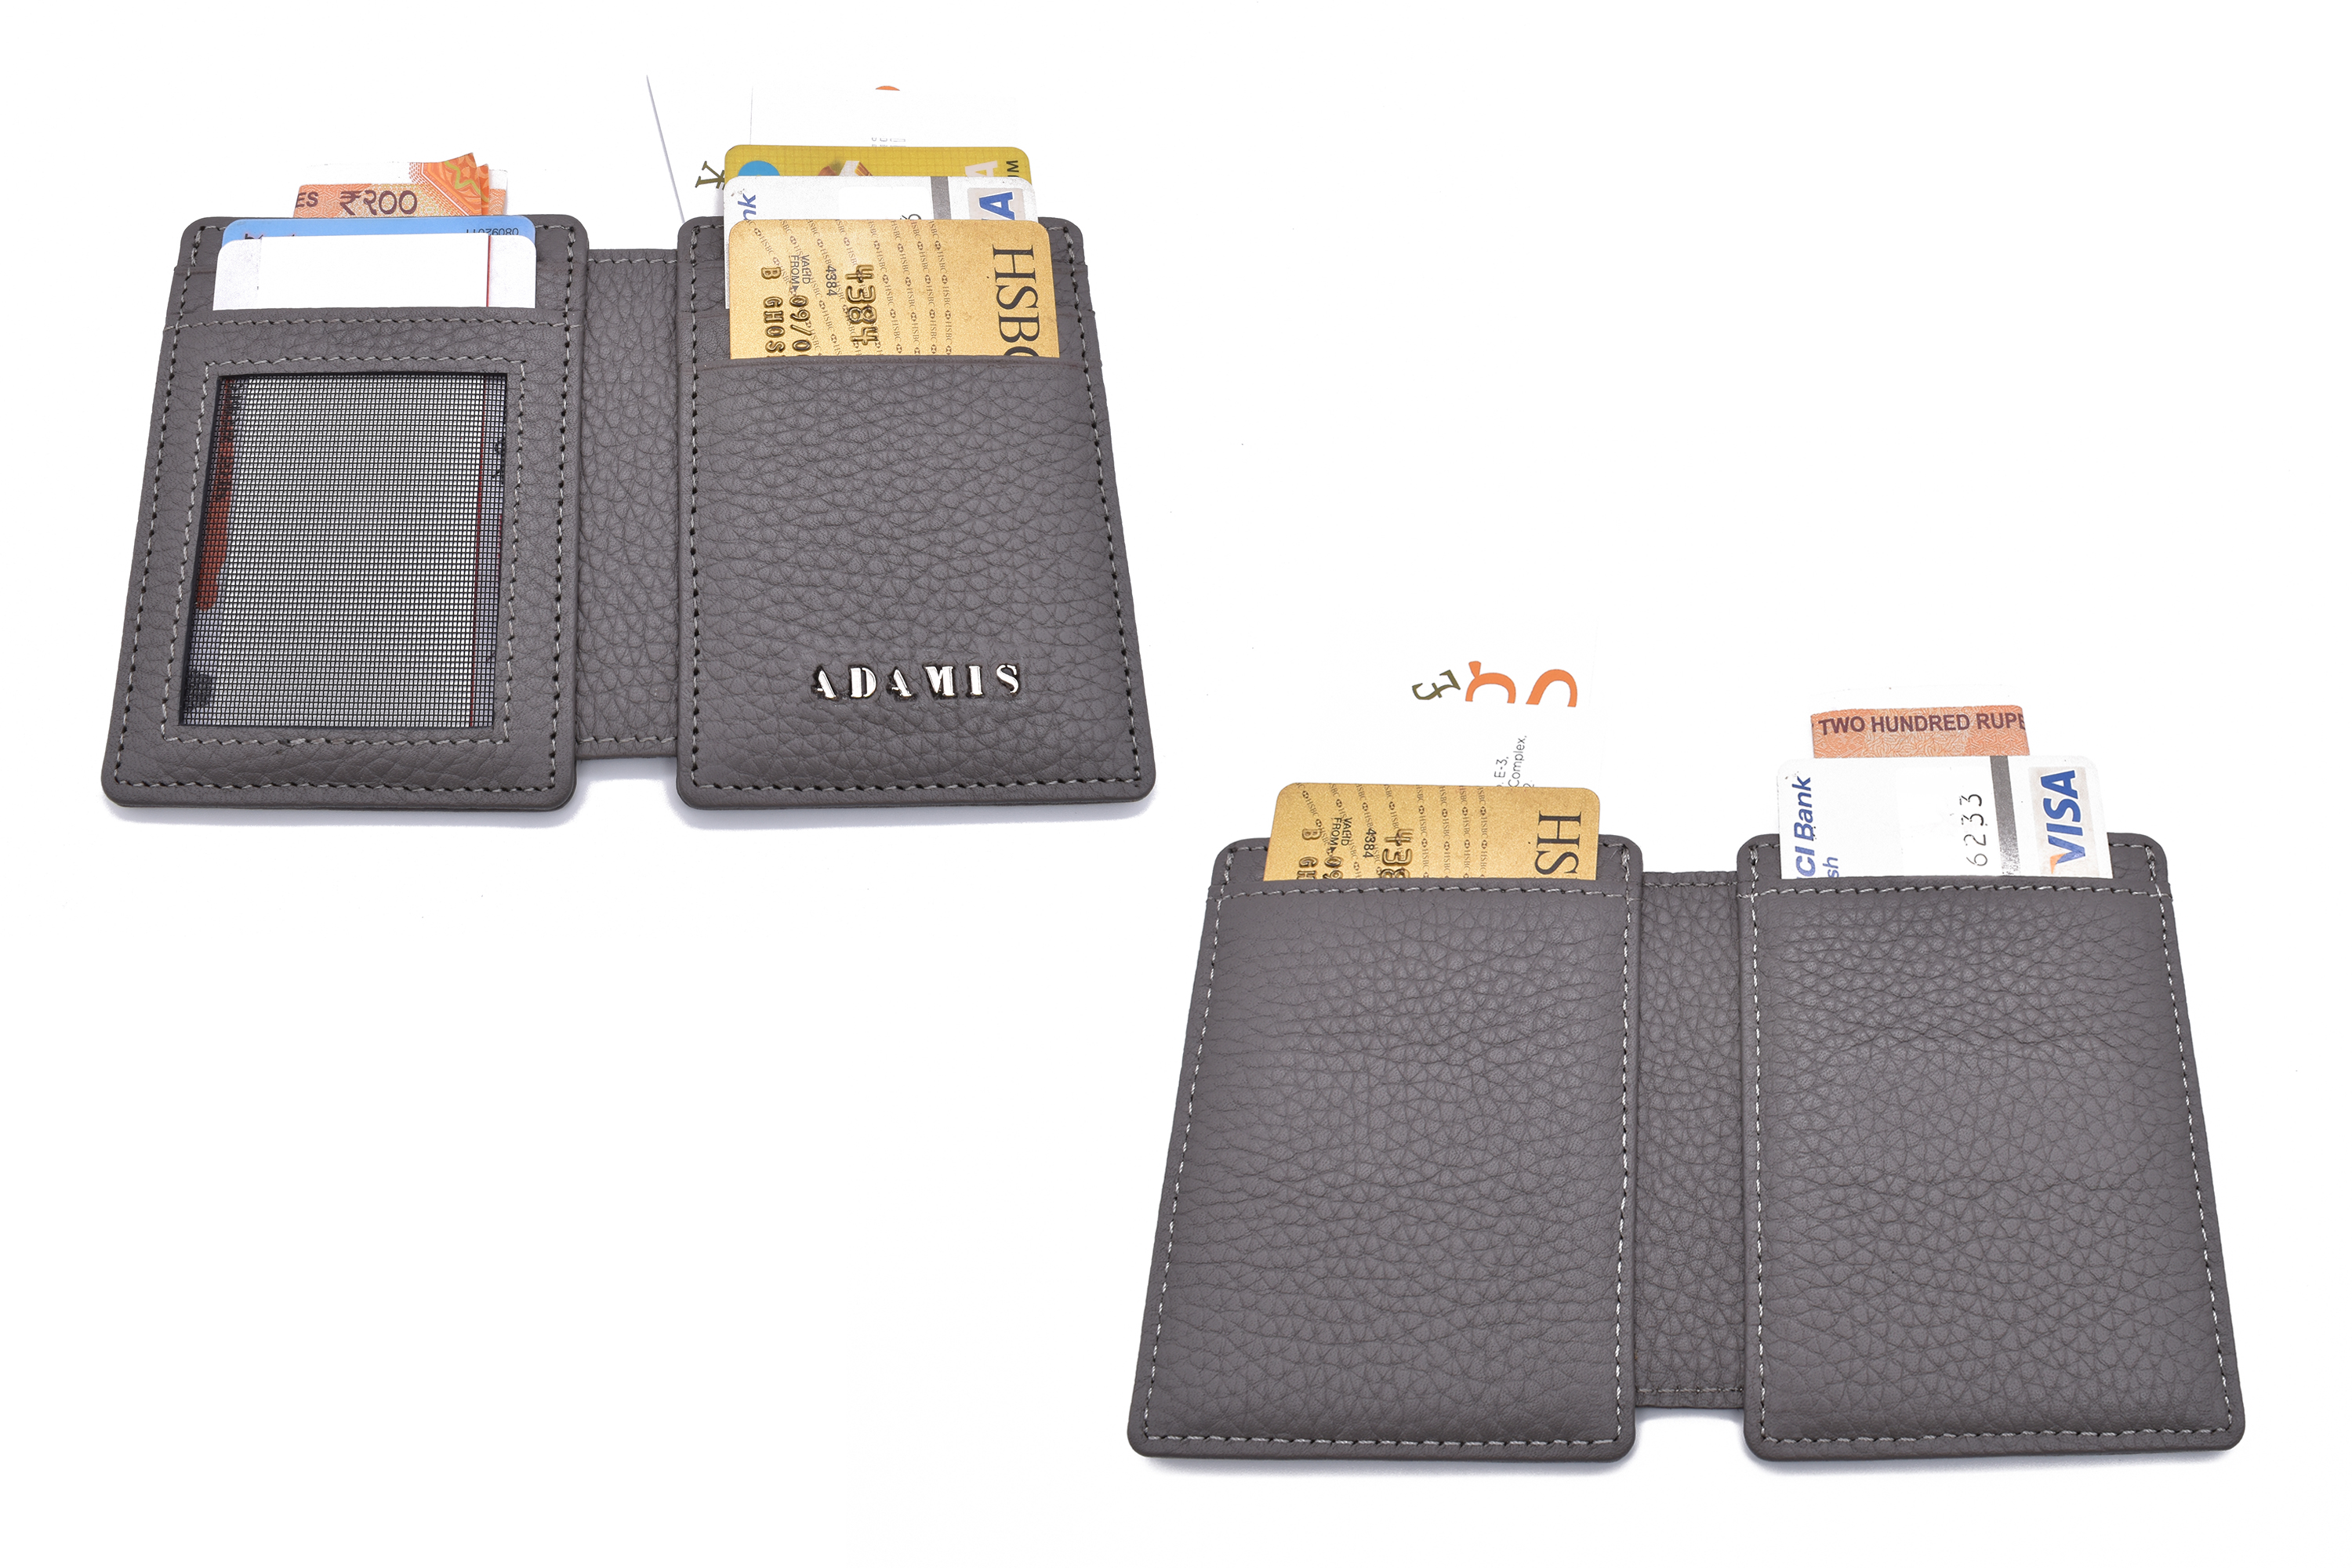 W339--Credit card case and magnetic money clip in genuine leather - Grey